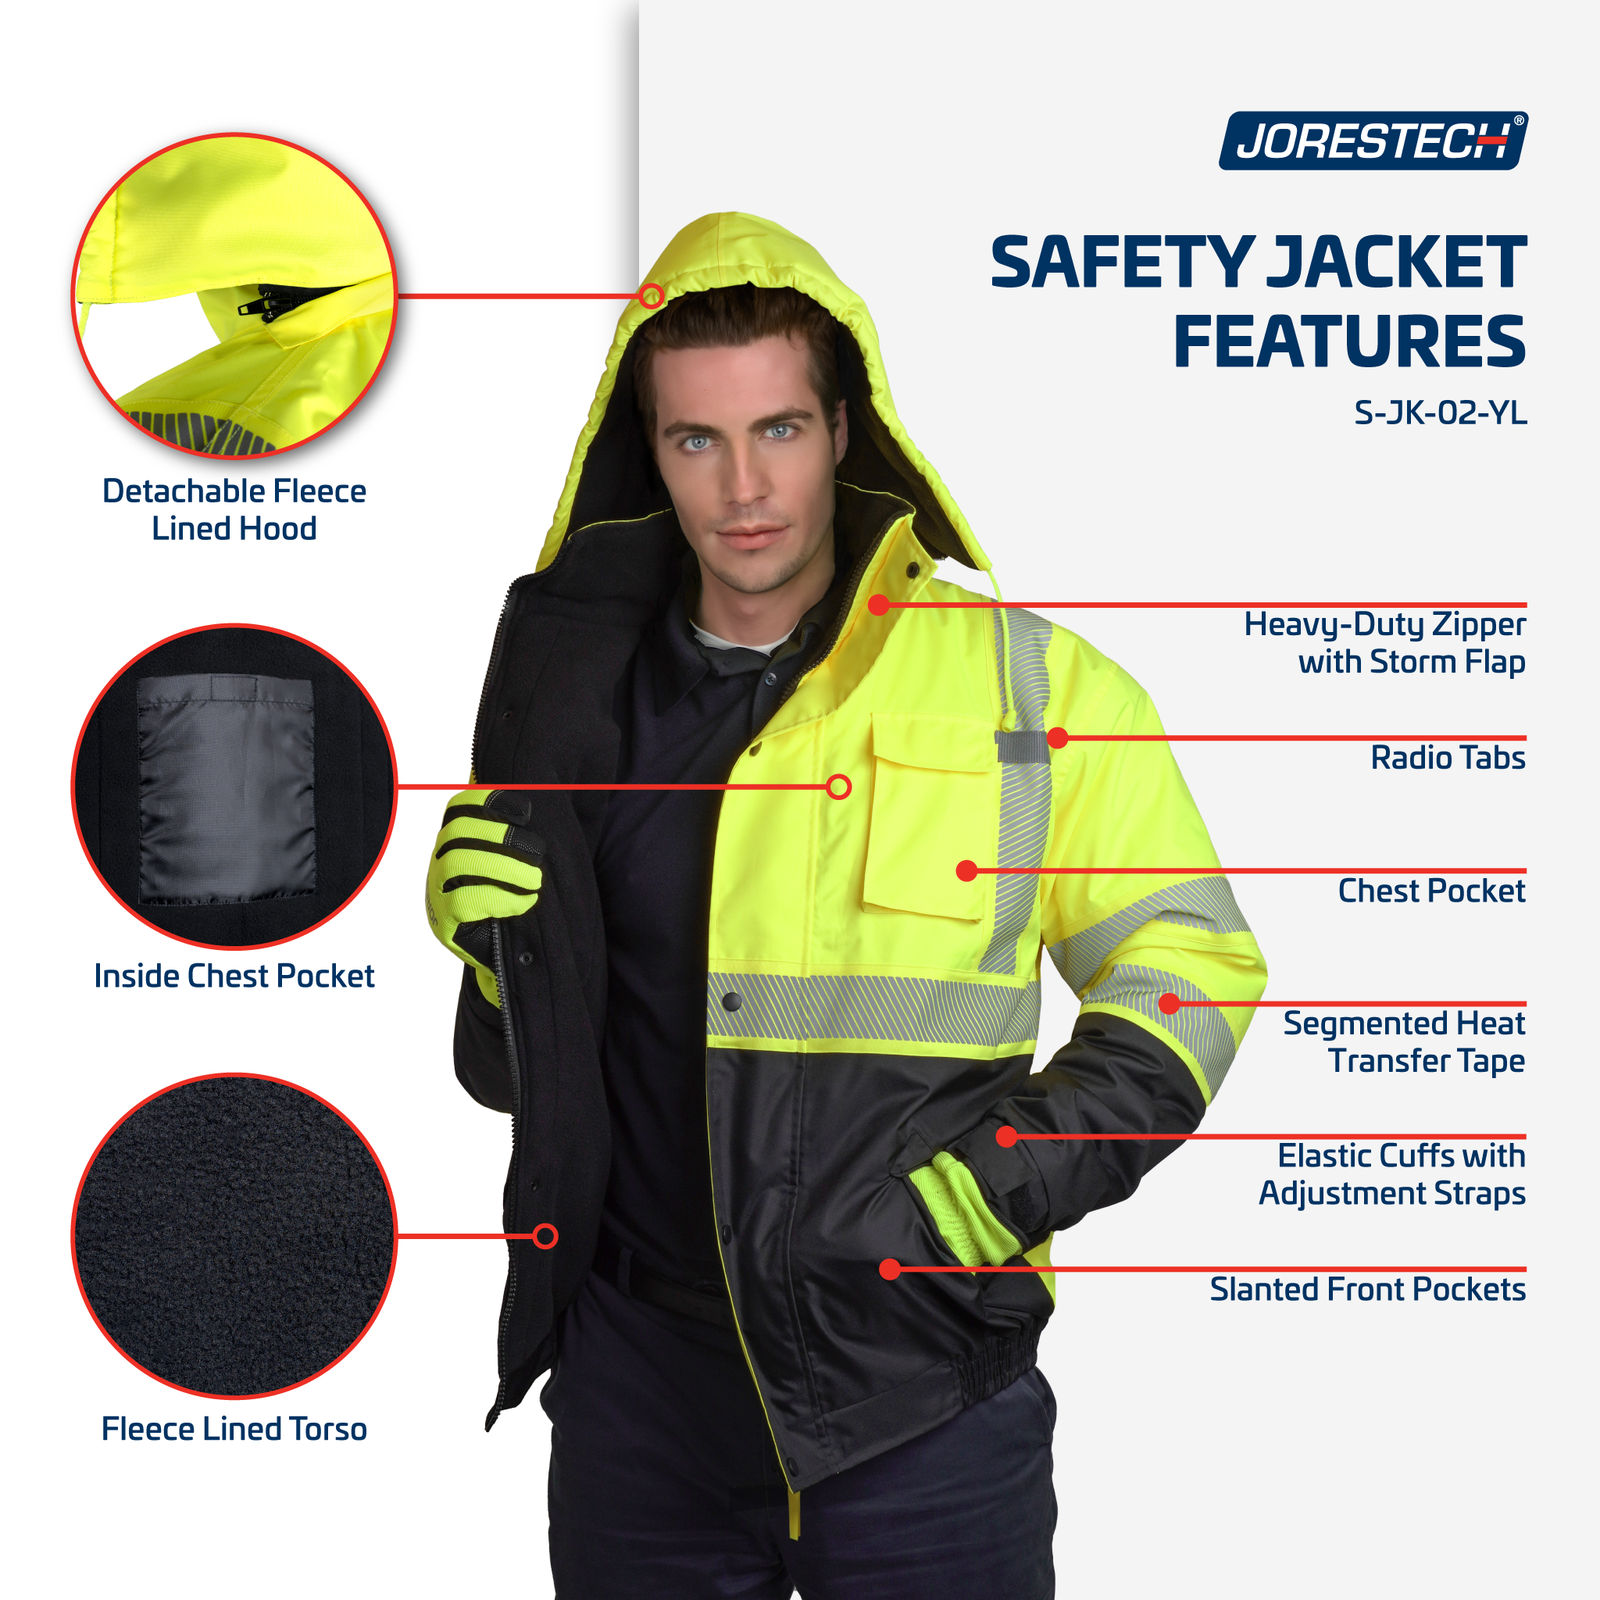 SKSAFETY High Visibility Reflective Jackets for Men, Waterproof Class 3 Safety Jacket with Pockets, Hi Vis Yellow Coats with Black Bottom, Mens Work